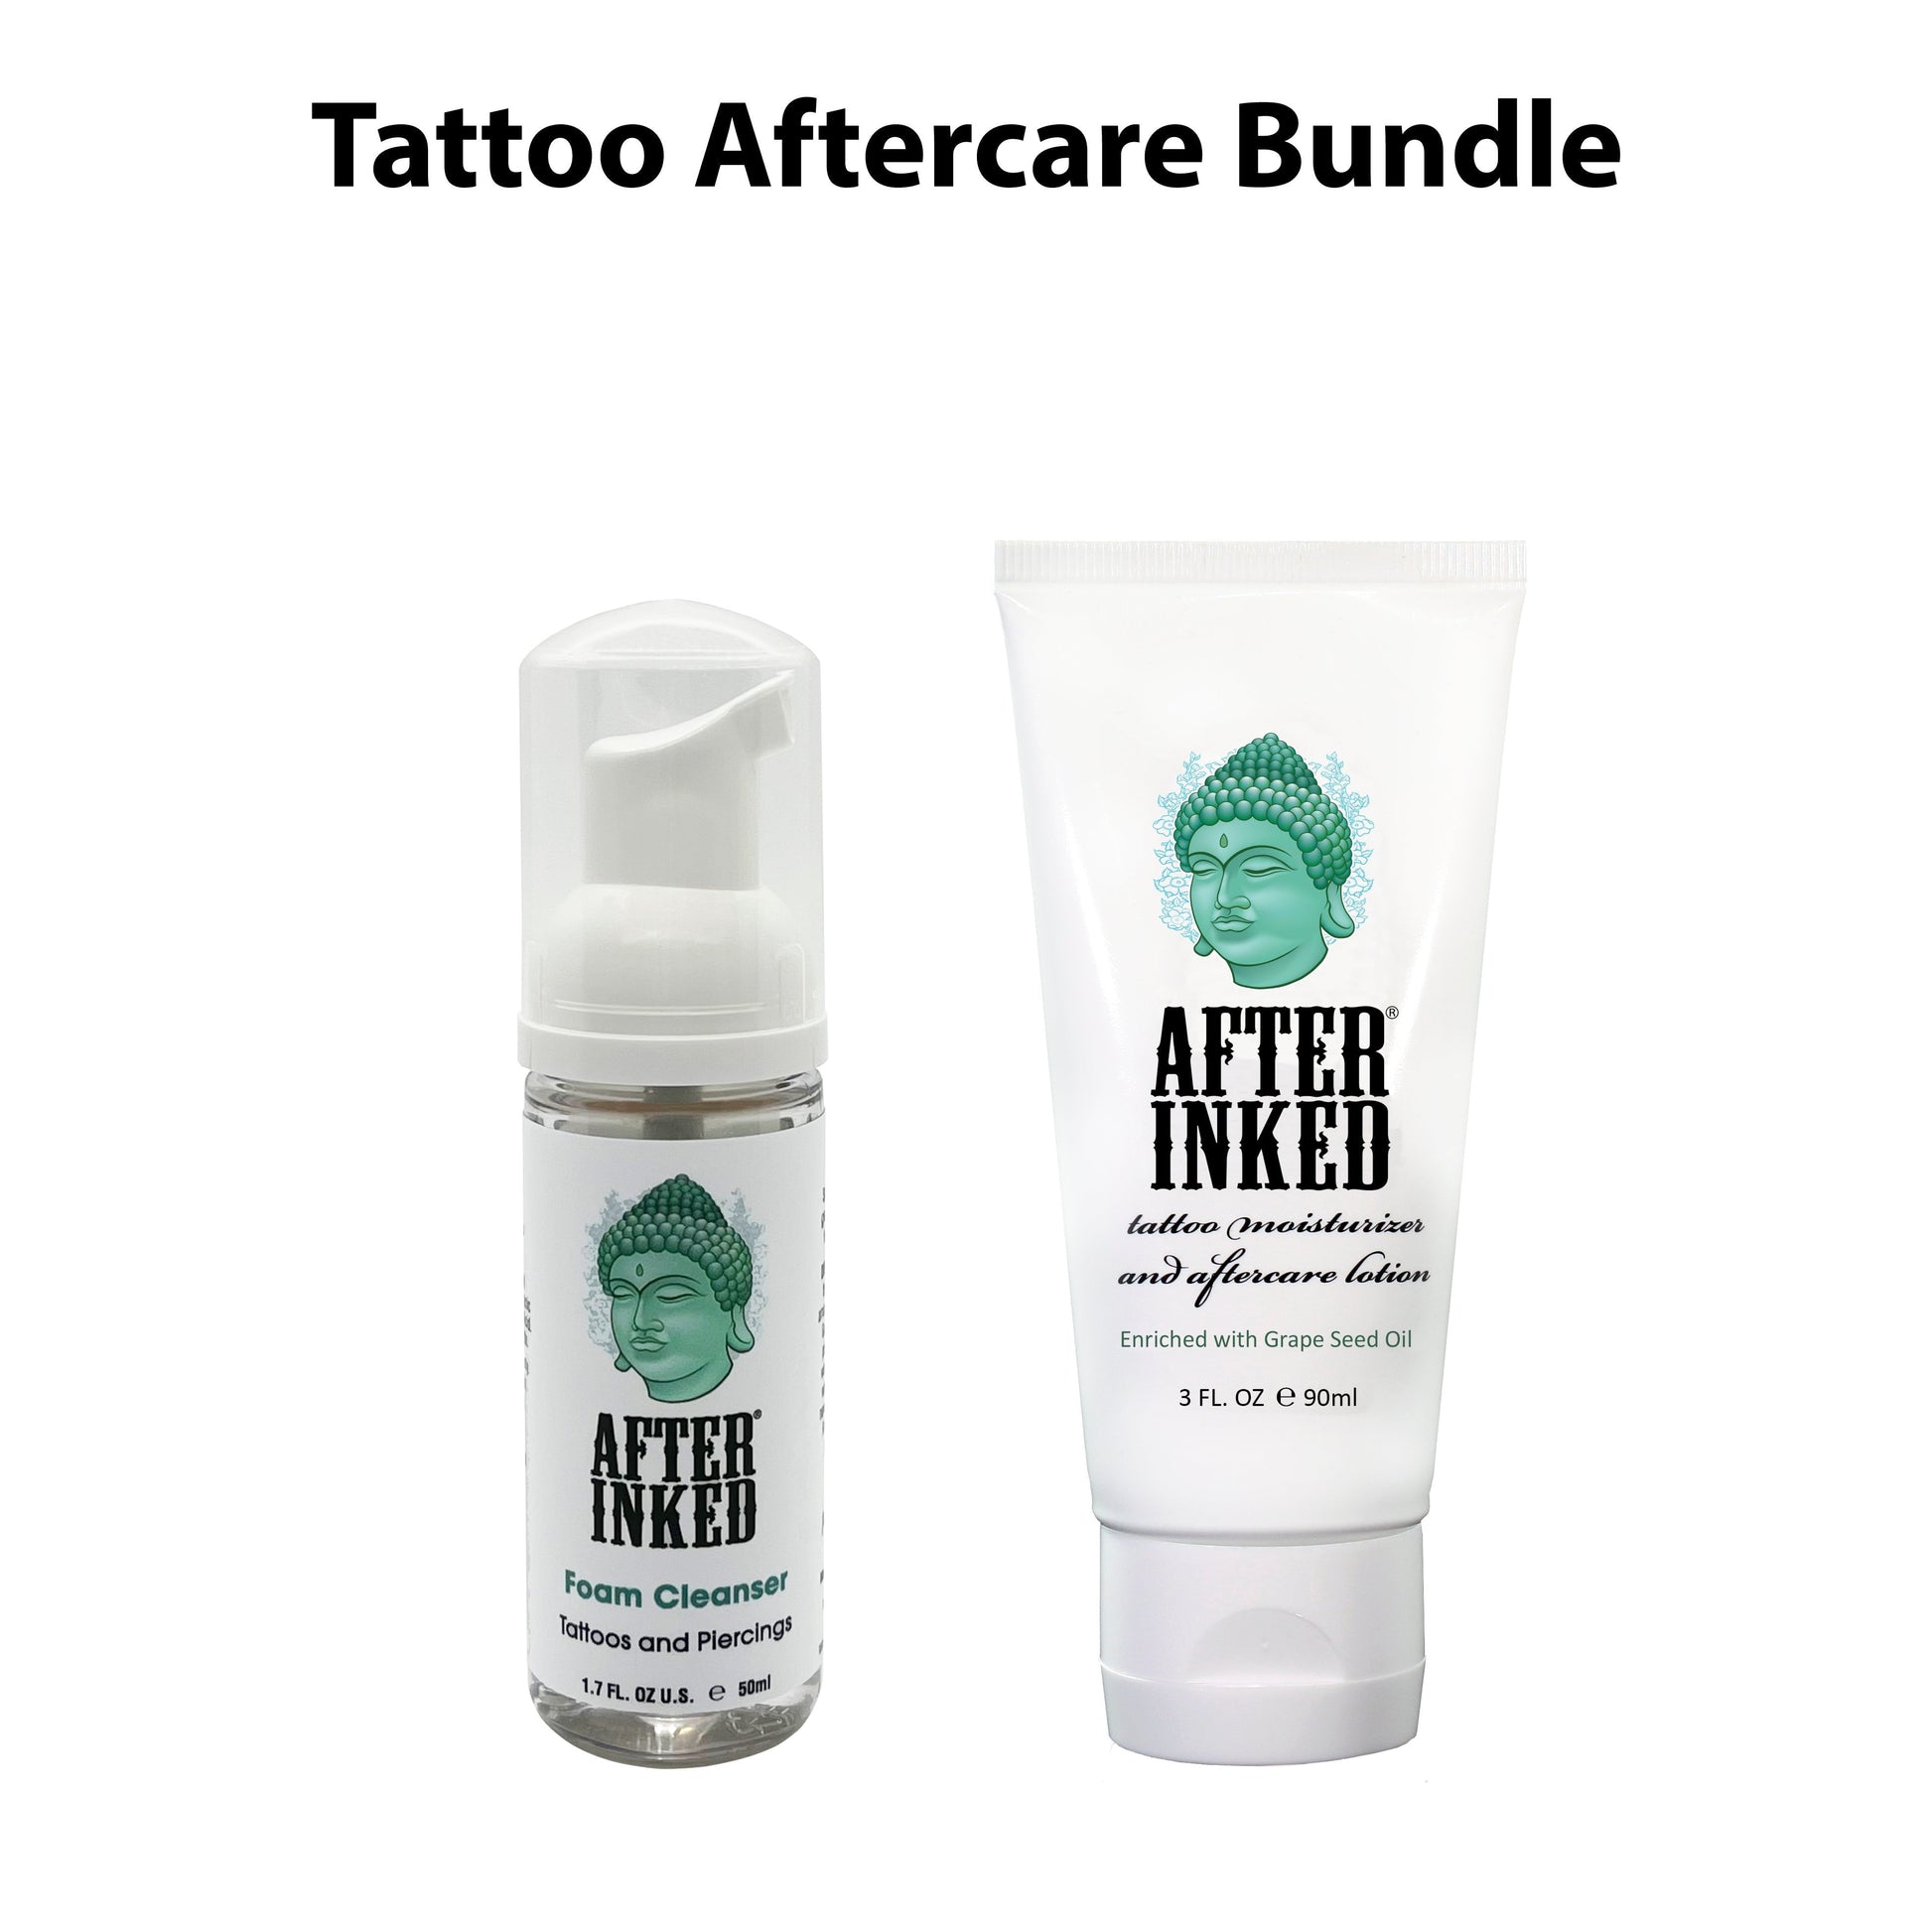 Tattoo aftercare bundle: Tattoo aftercare and piercing aftercare foam cleanser, 1.7oz bottle, plus Tattoo aftercare and piercing aftercare foam cleanser, 1.7oz bottle